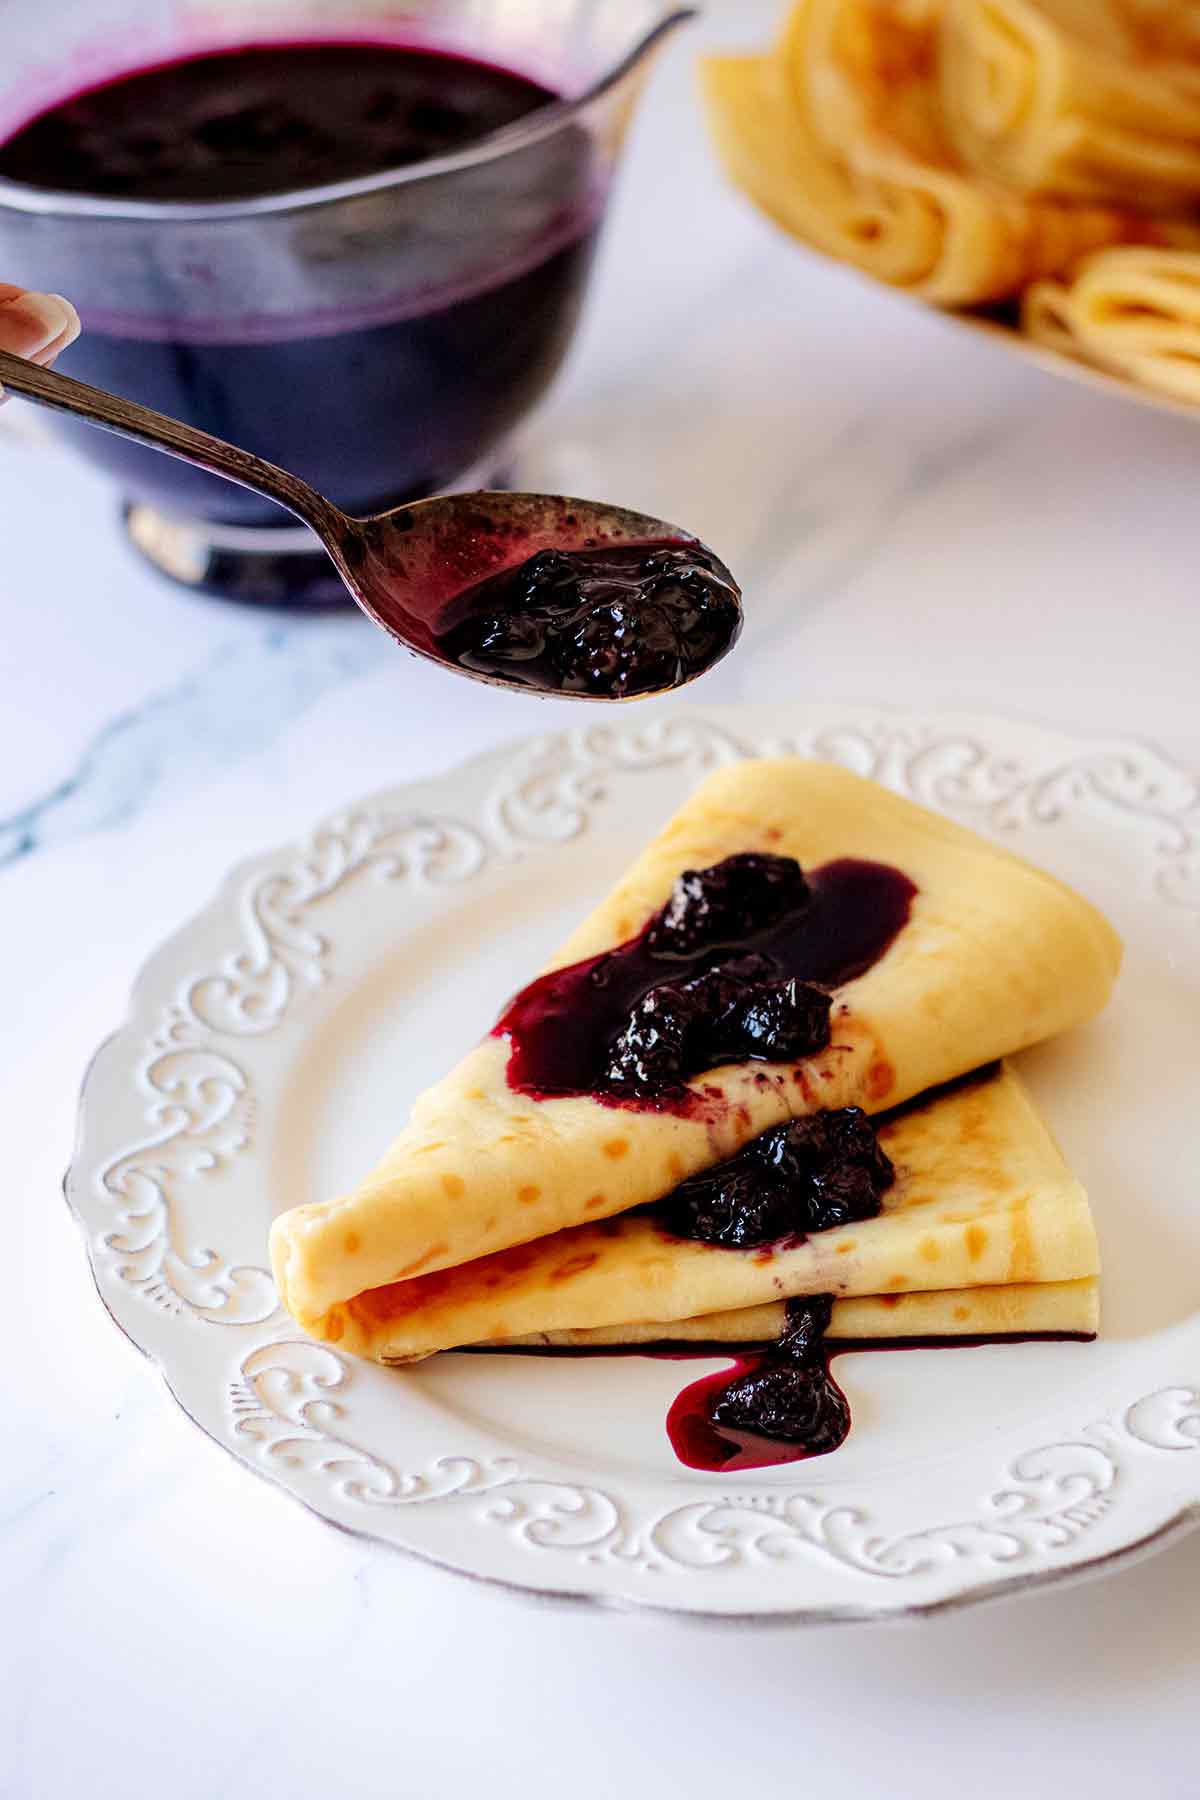 Spoonful of homemade blueberry syrup being poured onto a folded breakfast crepe on a white plate